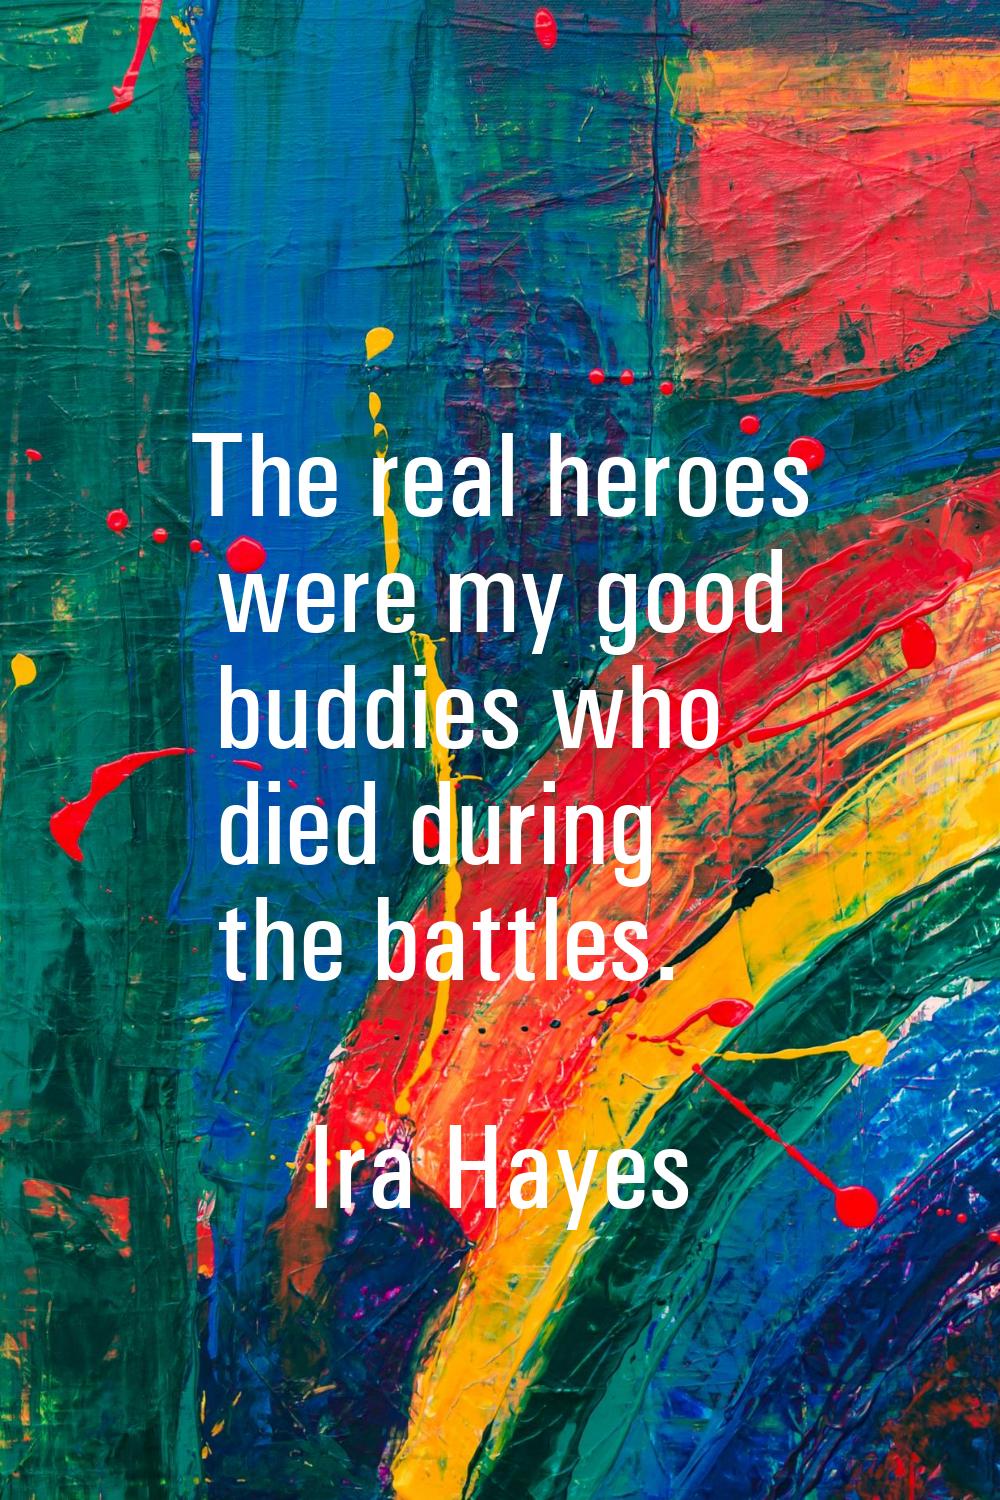 The real heroes were my good buddies who died during the battles.